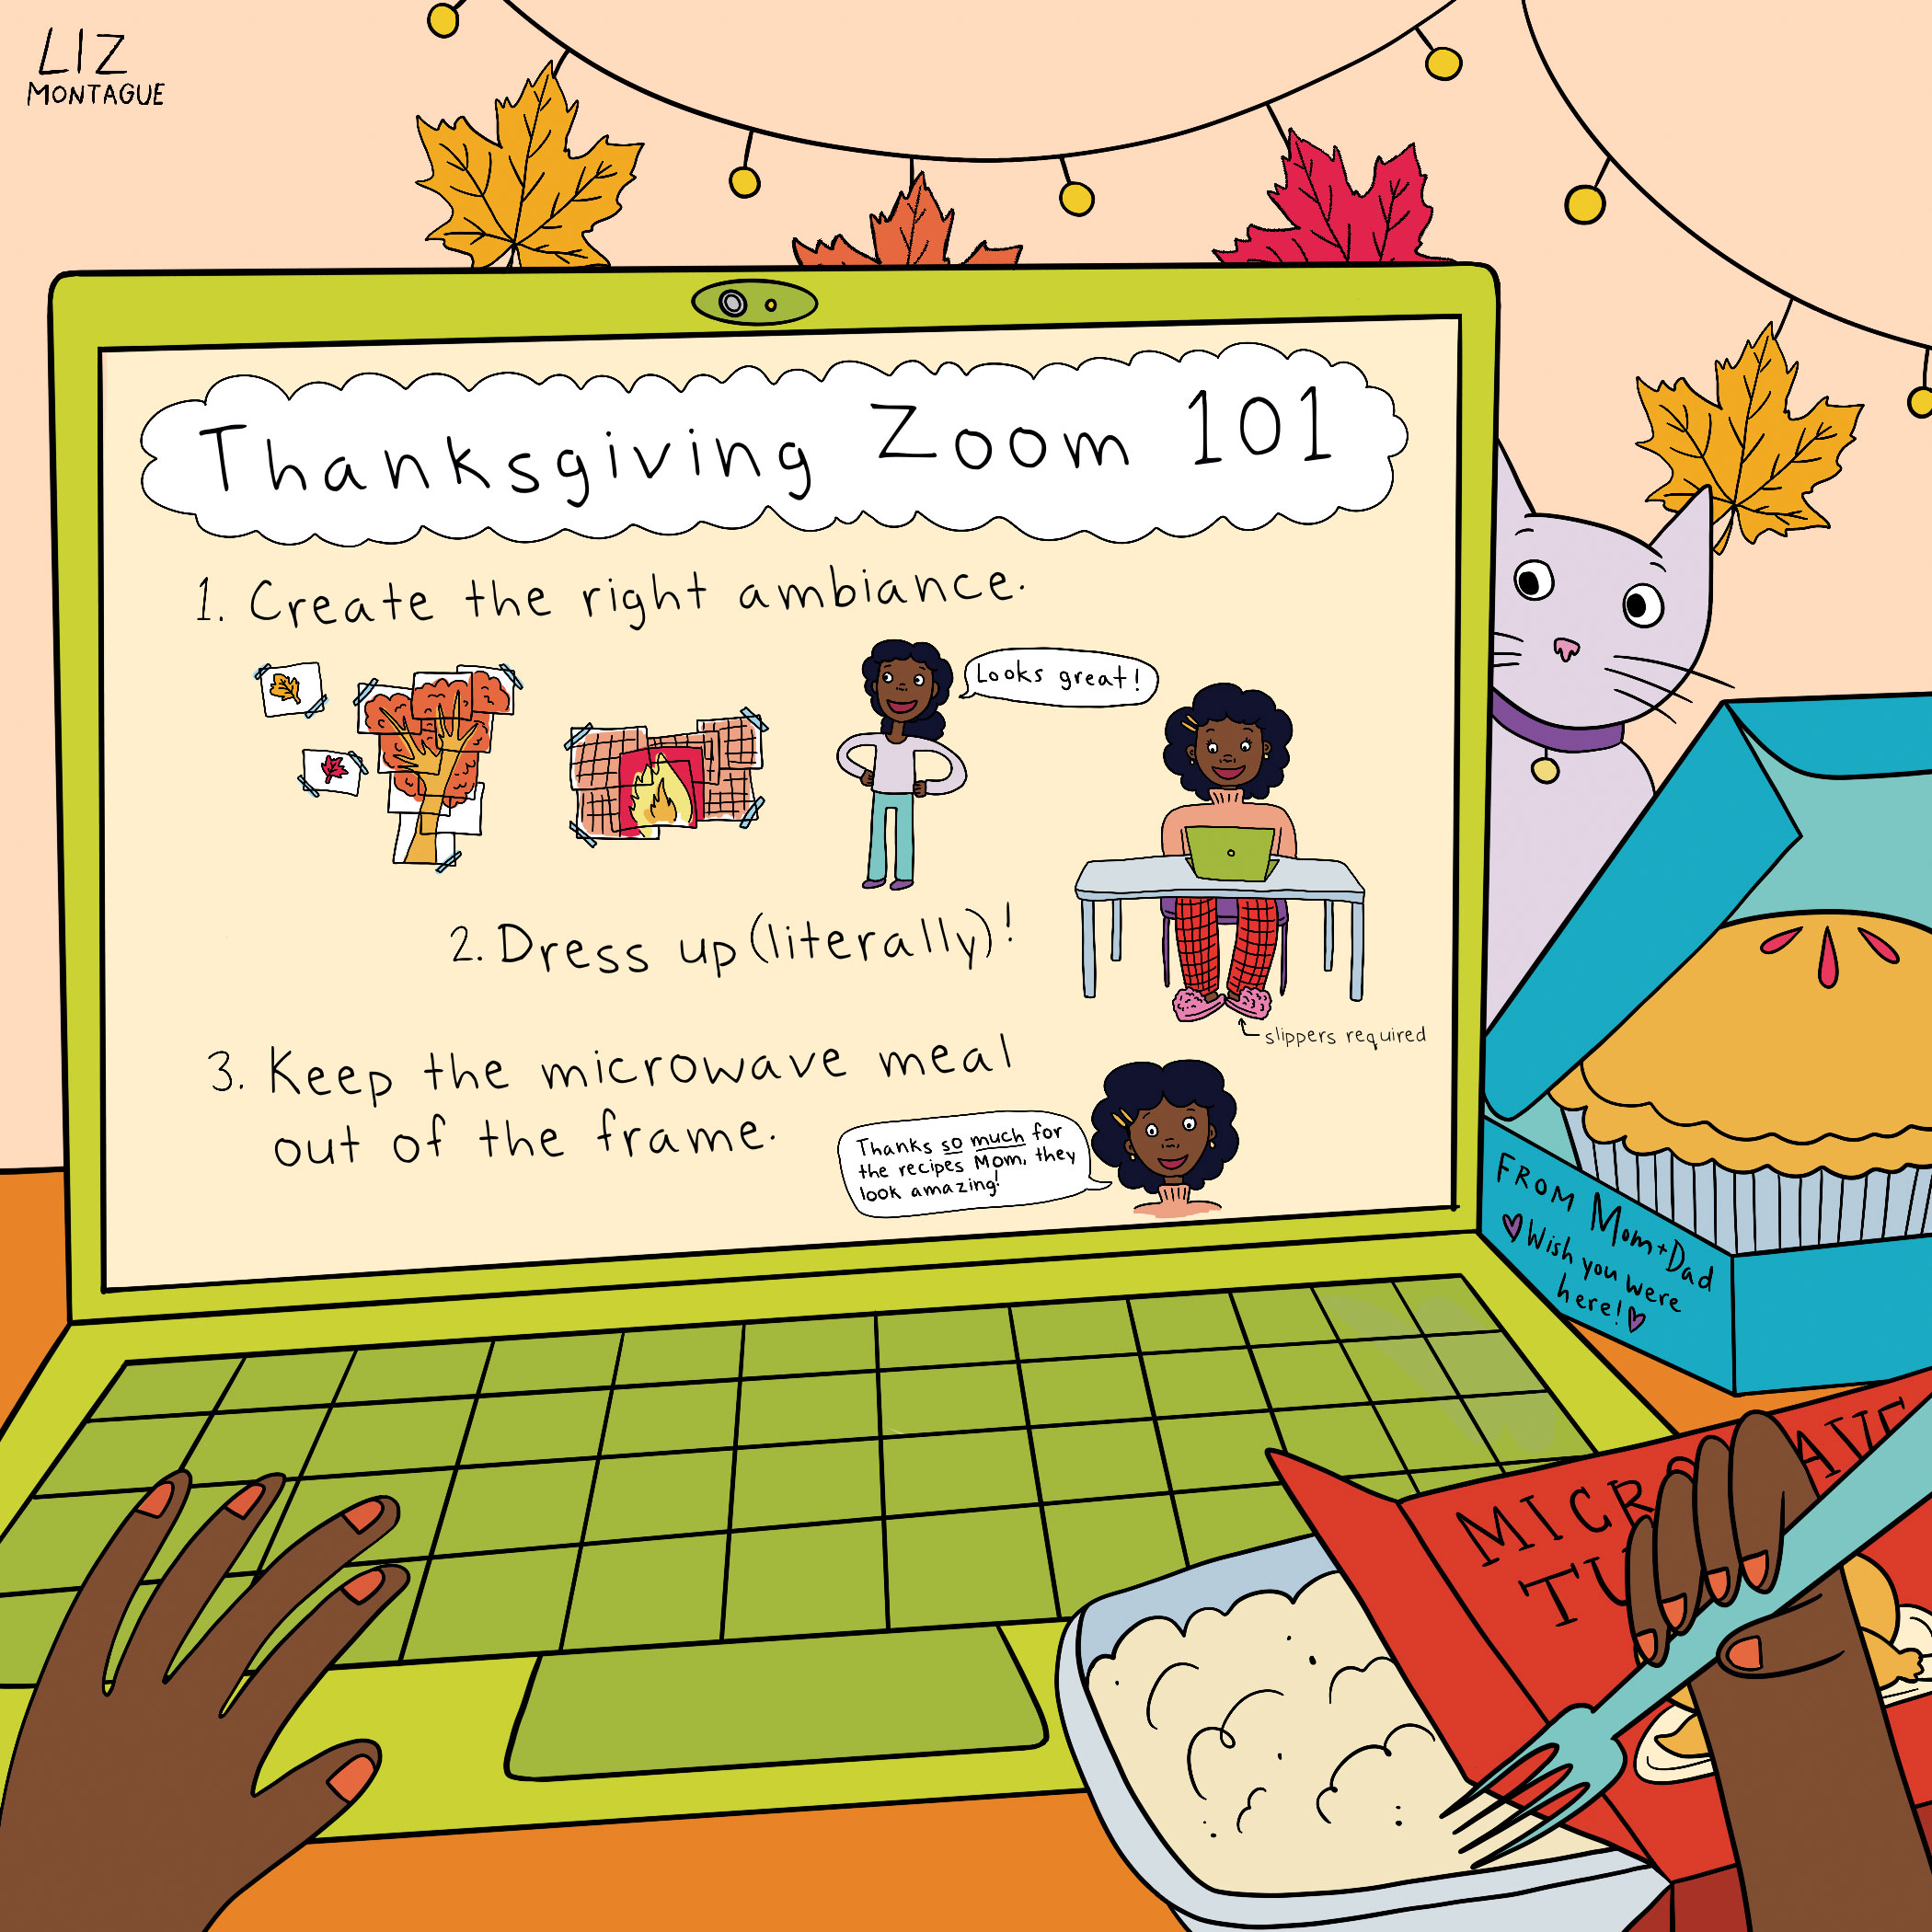 It’s OK to laugh at your Zoom Thanksgiving set-up.